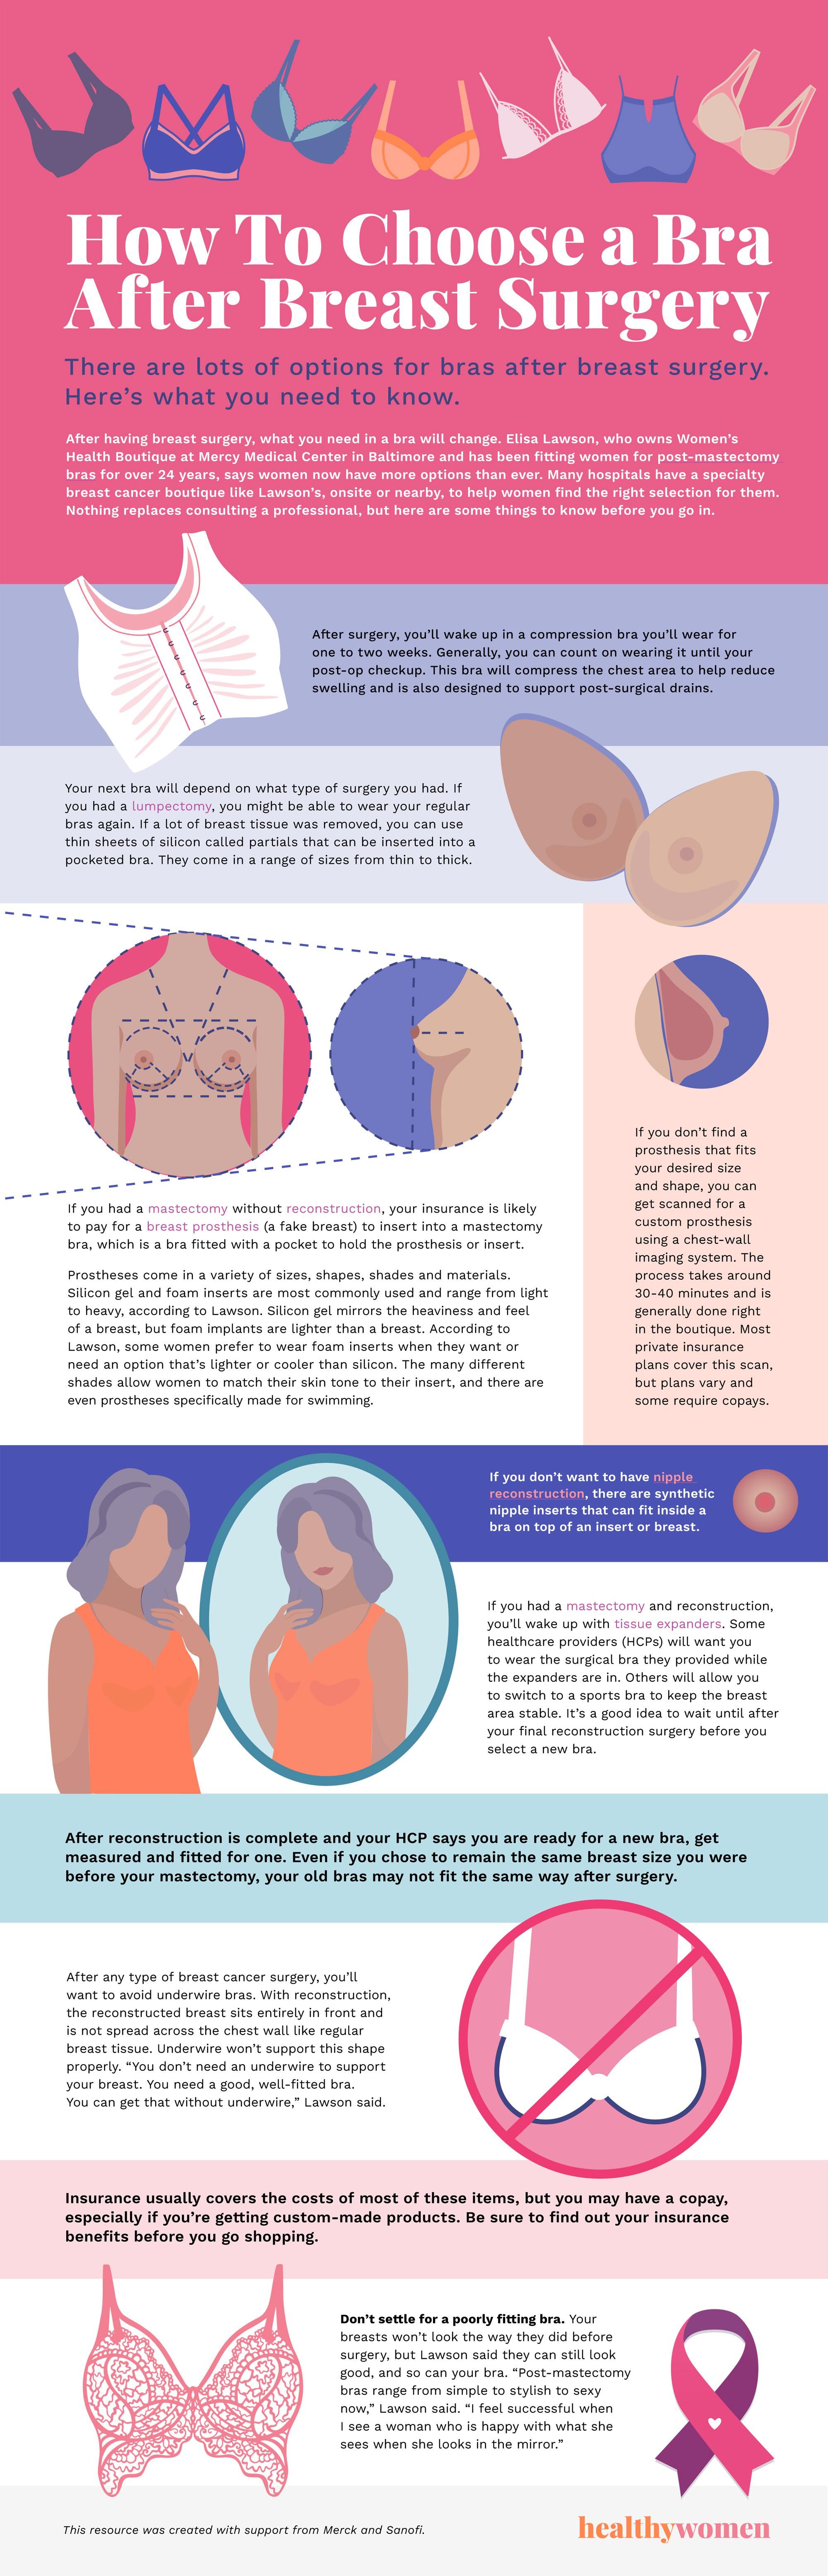 Infographic How To Choose A Bra After Breast Surgery.  Click image to open PDF